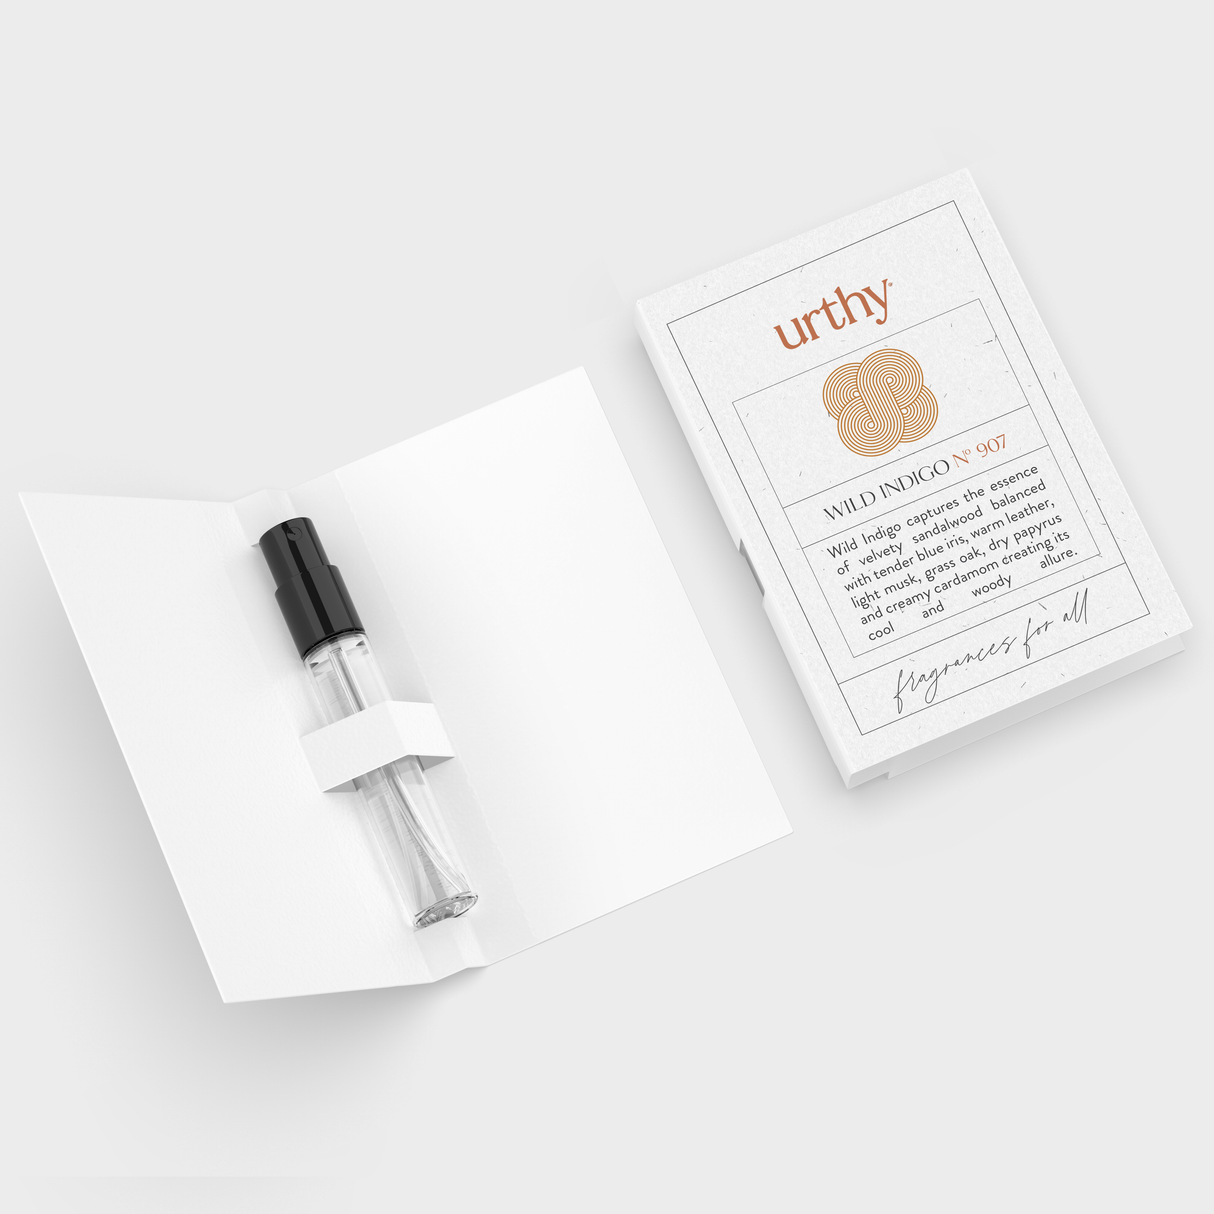 Urthy Scent Samples